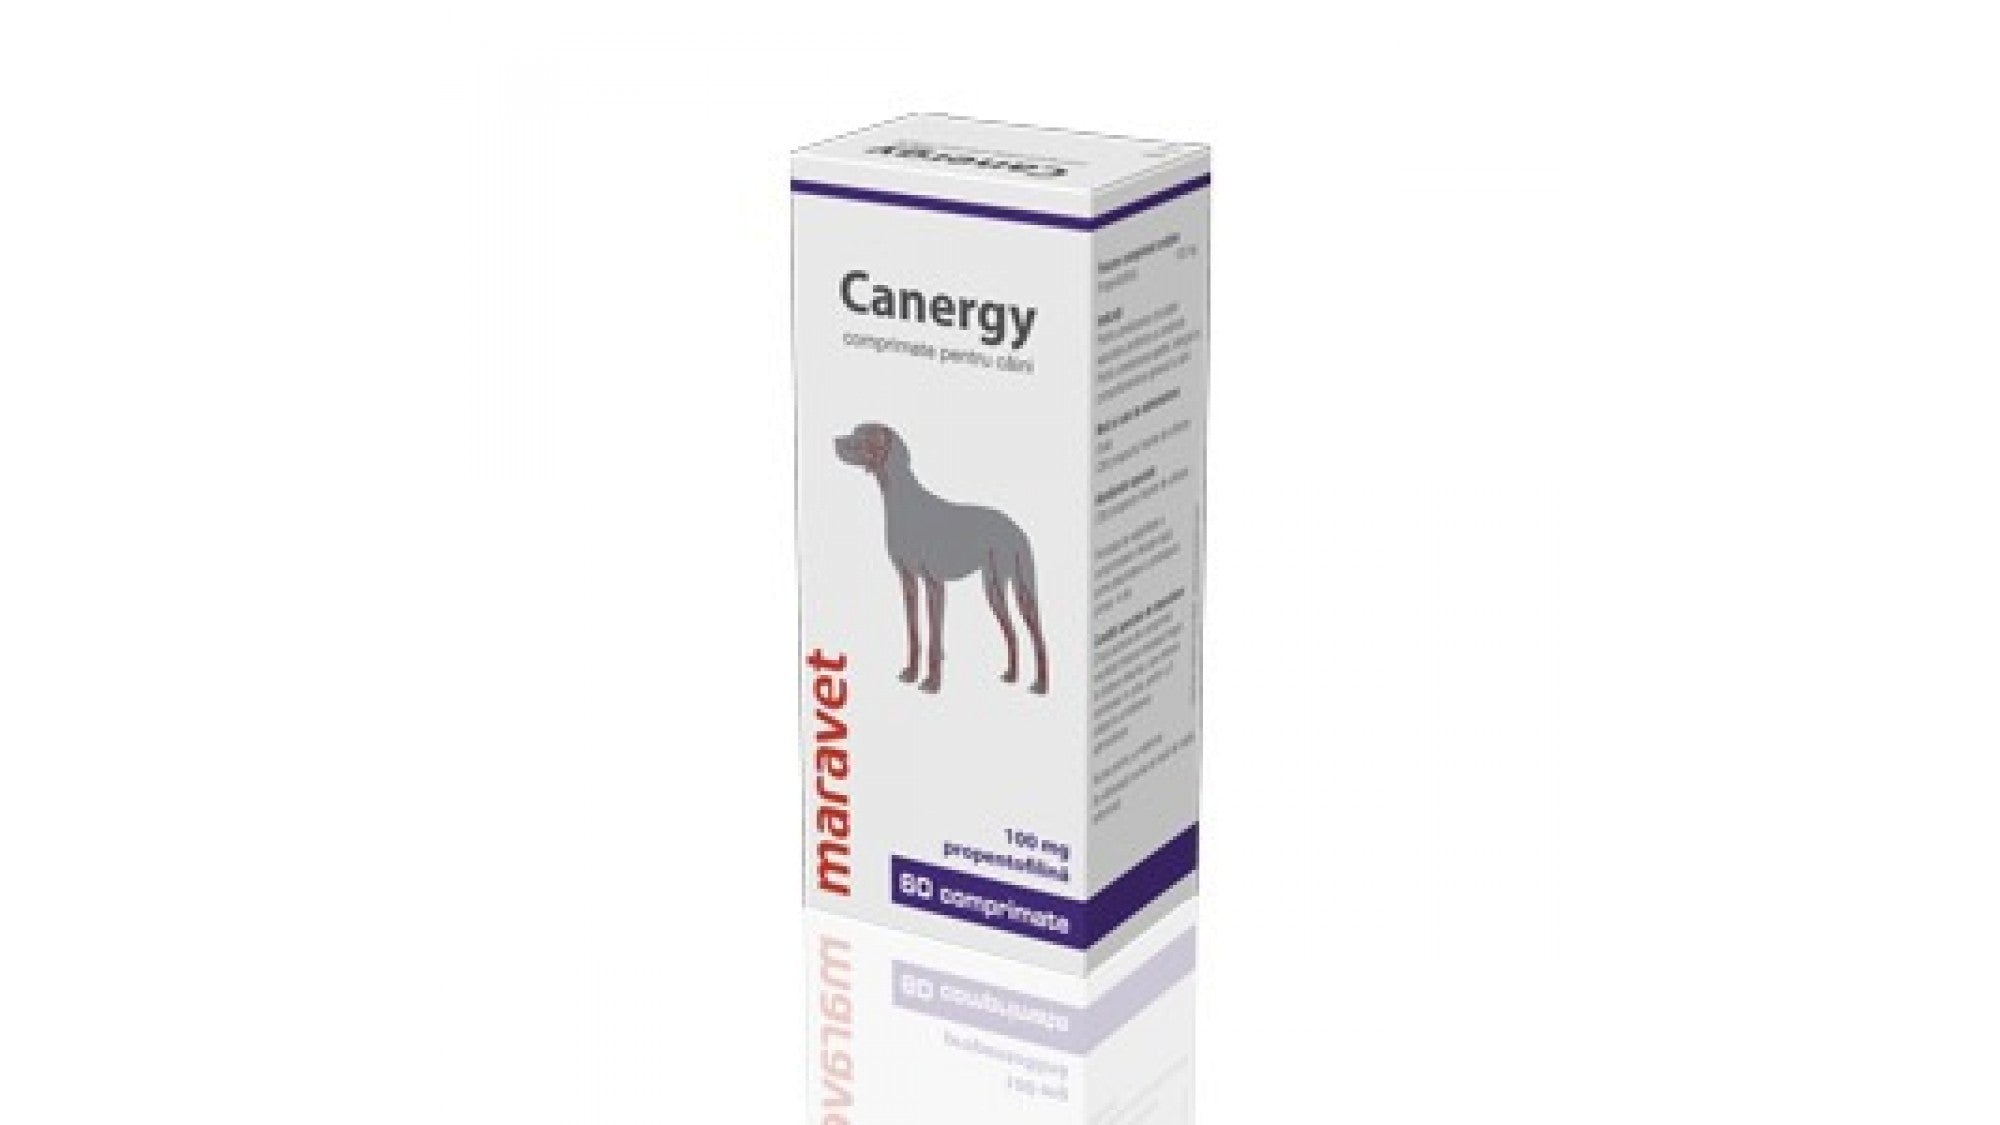 Canergy 100 mg 6 X 10 comprimate